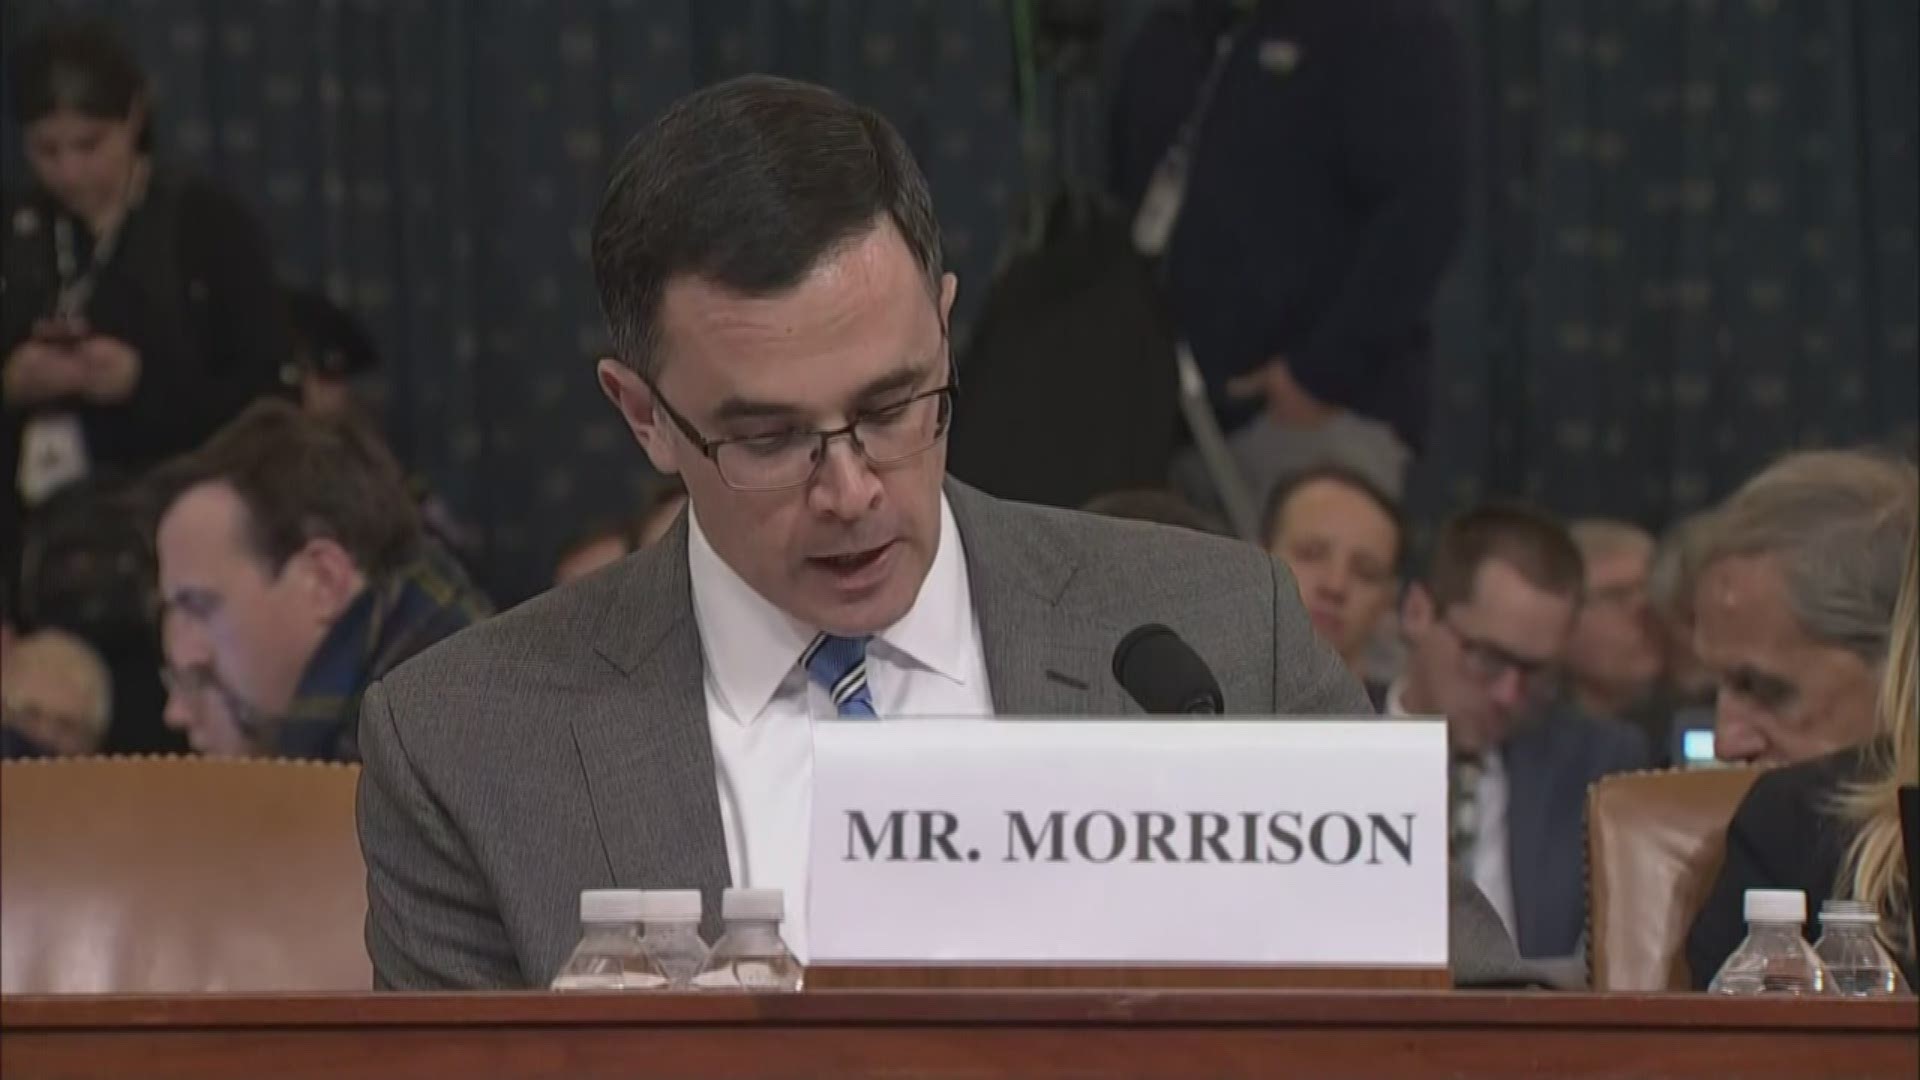 Tim Morrison, a former top aide on the National Security Council, gives his opening statement during Tuesday afternoon's impeachment hearing.